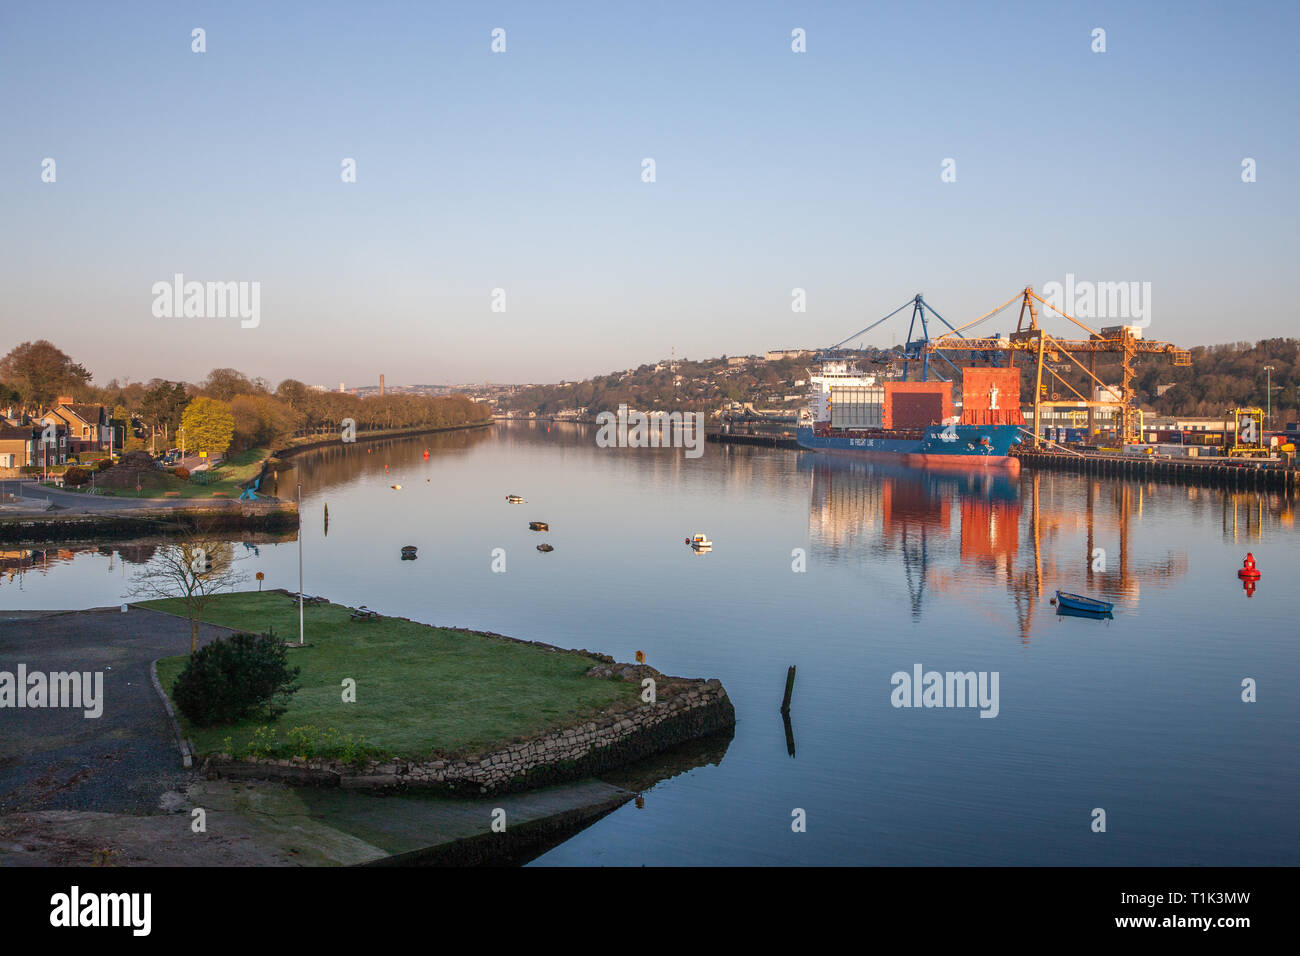 Blackrock, Cork, Ireland. 27th March, 2019. A view up the River Lee, including  the Marina and across to the Tivoli docks where the container ship BG Emerald is offloading her cargo as seen from Blackrock, Cork, Ireland. Credit: David Creedon/Alamy Live News Stock Photo